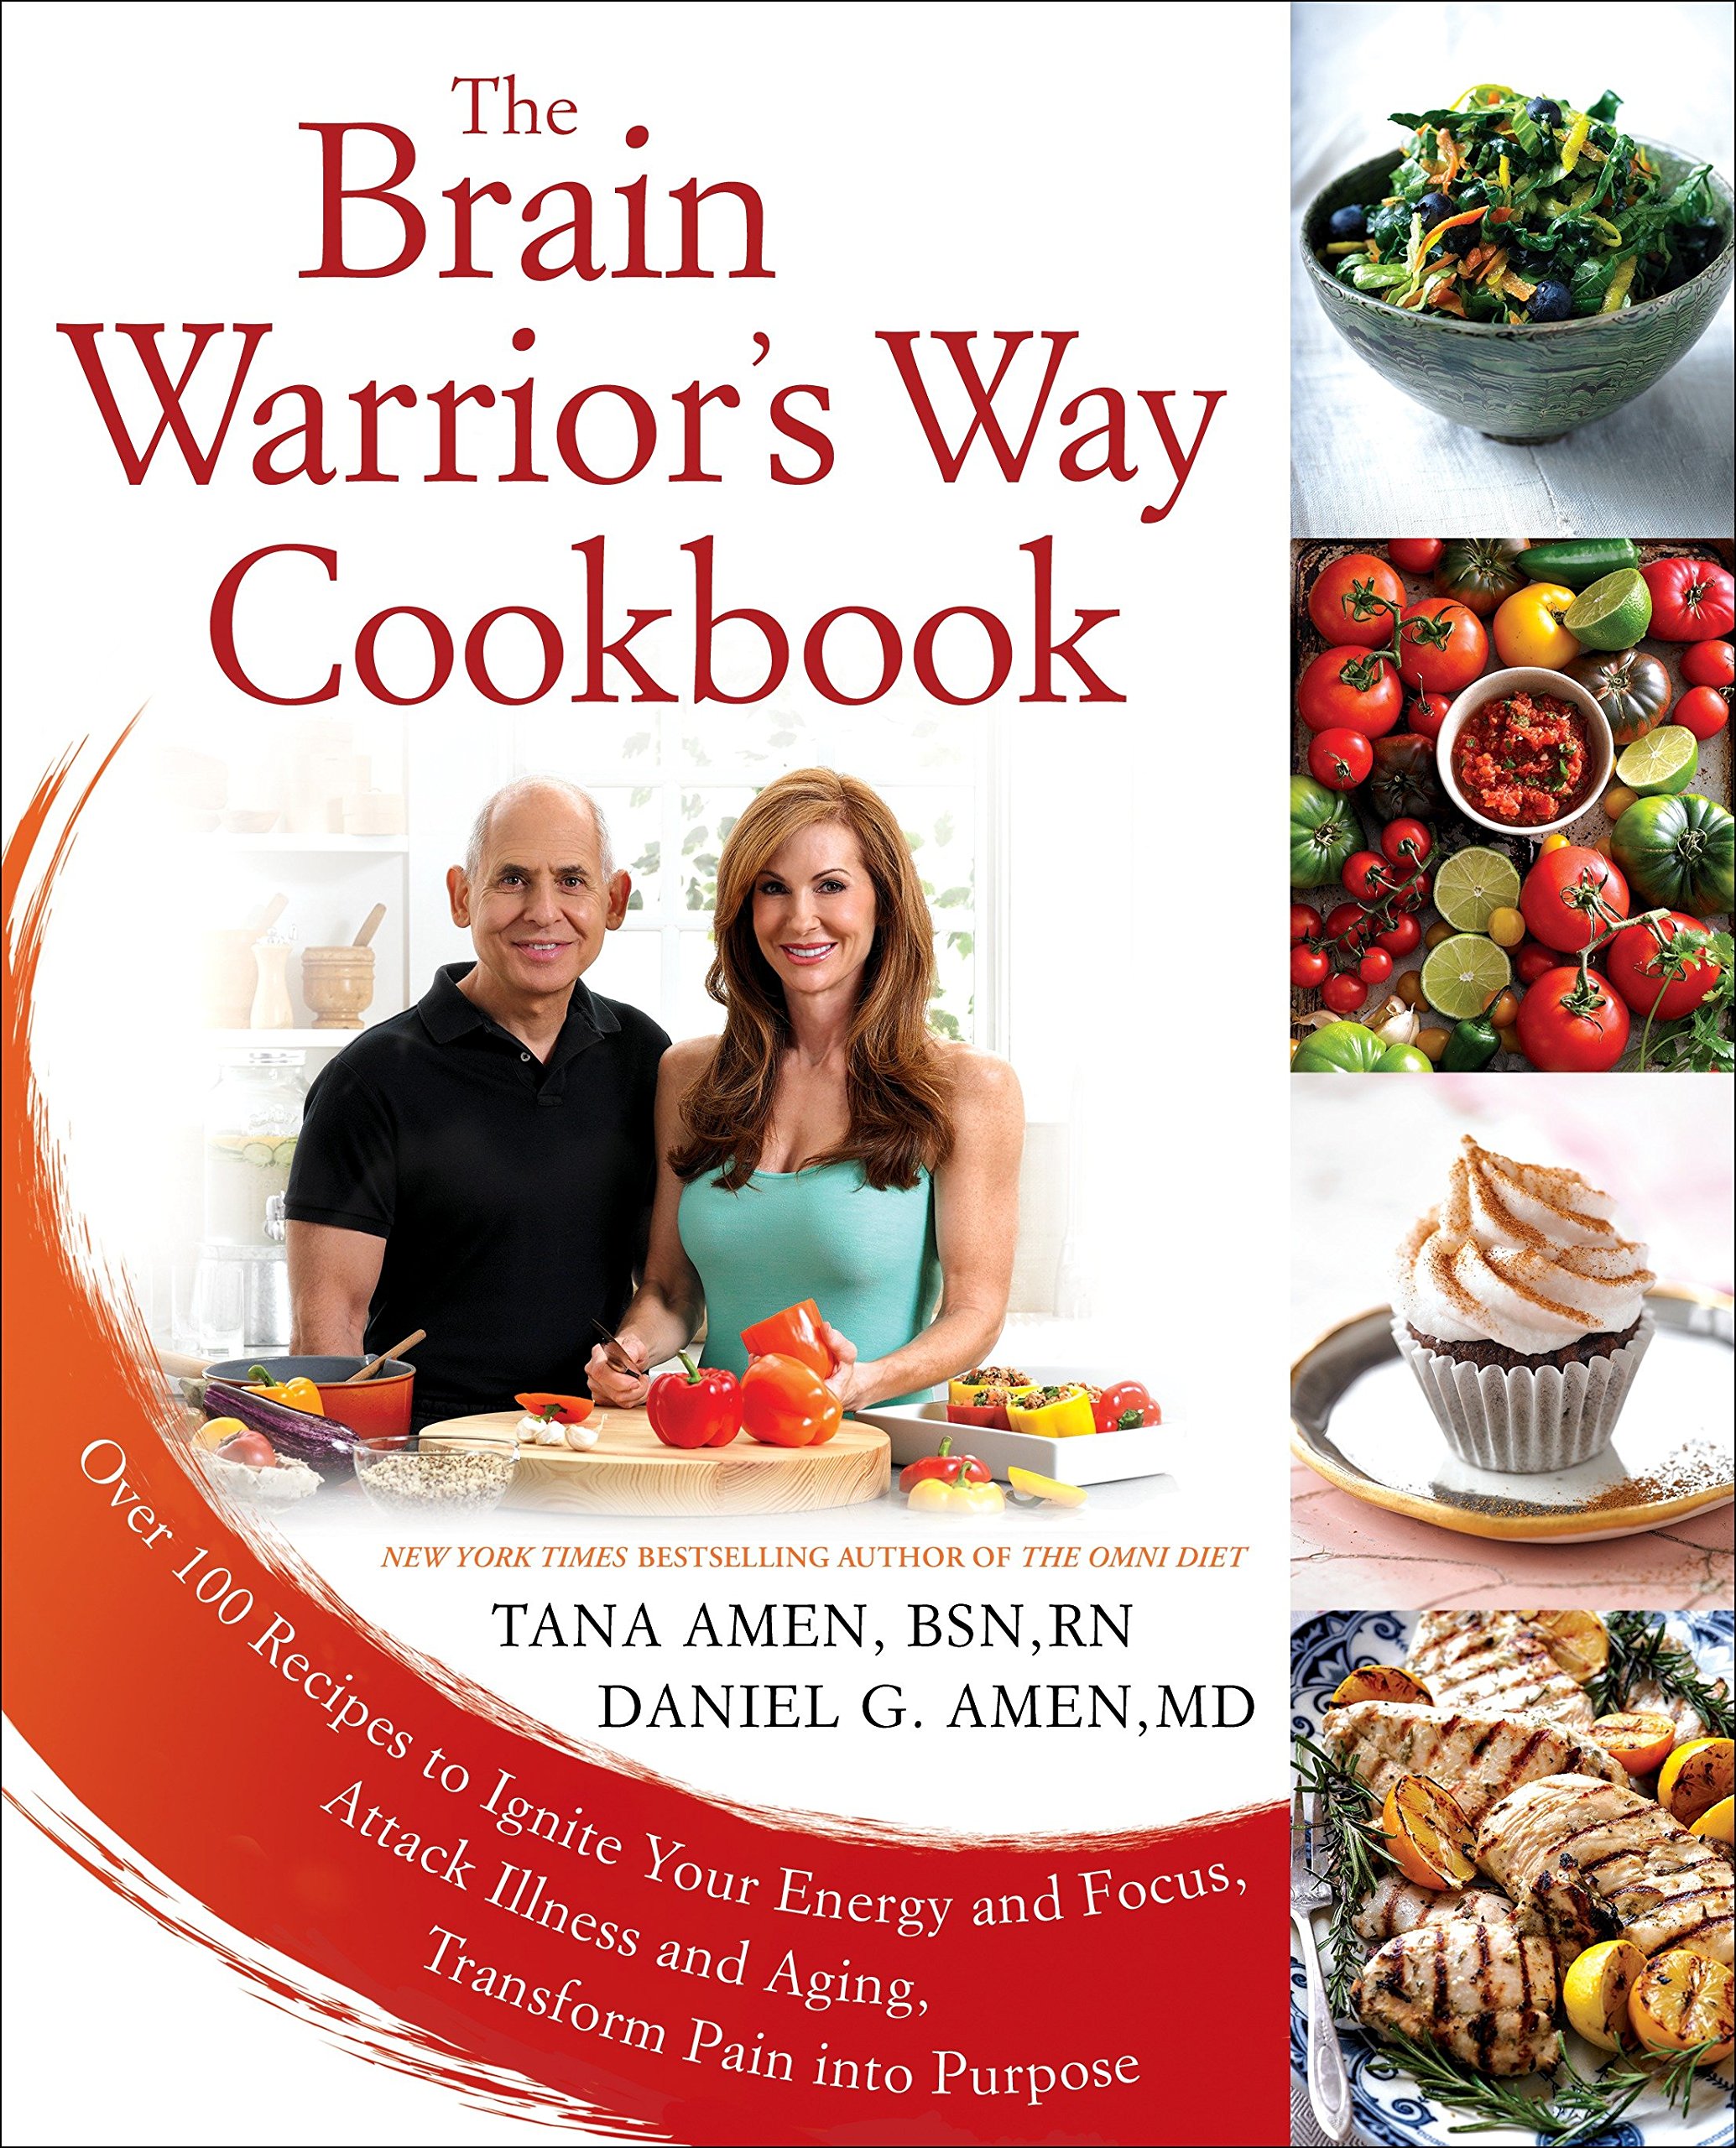 The Brain Warriors Way Cookbook Over 100 Recipes to Ignite Your Energy and Focus, Attack Illness and Aging, Transform Pain into Purpose